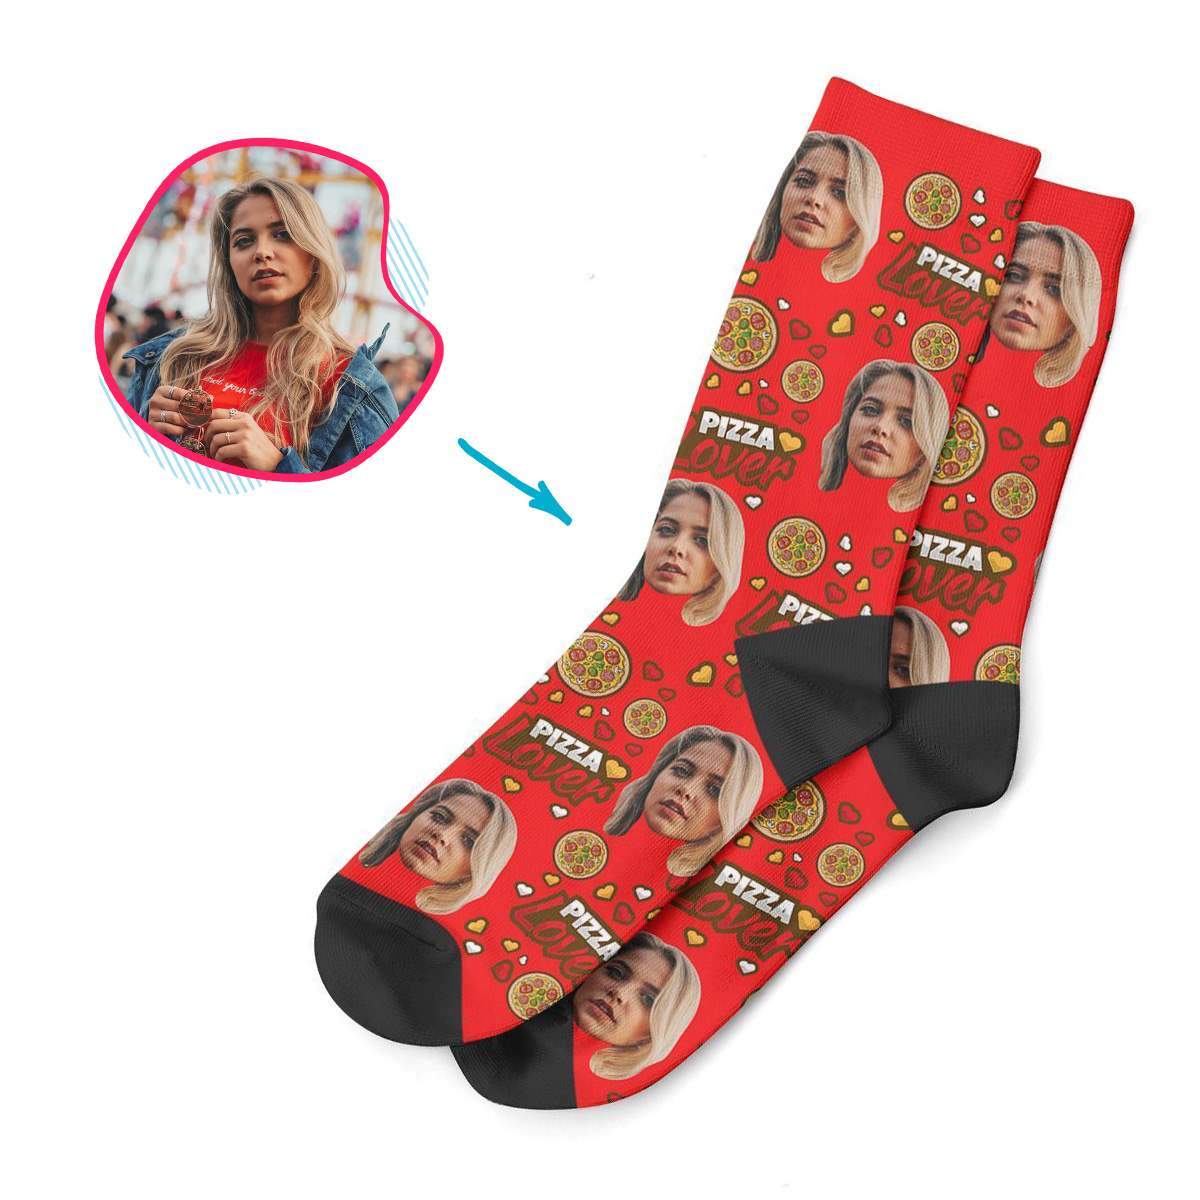 red Pizza Lover socks personalized with photo of face printed on them